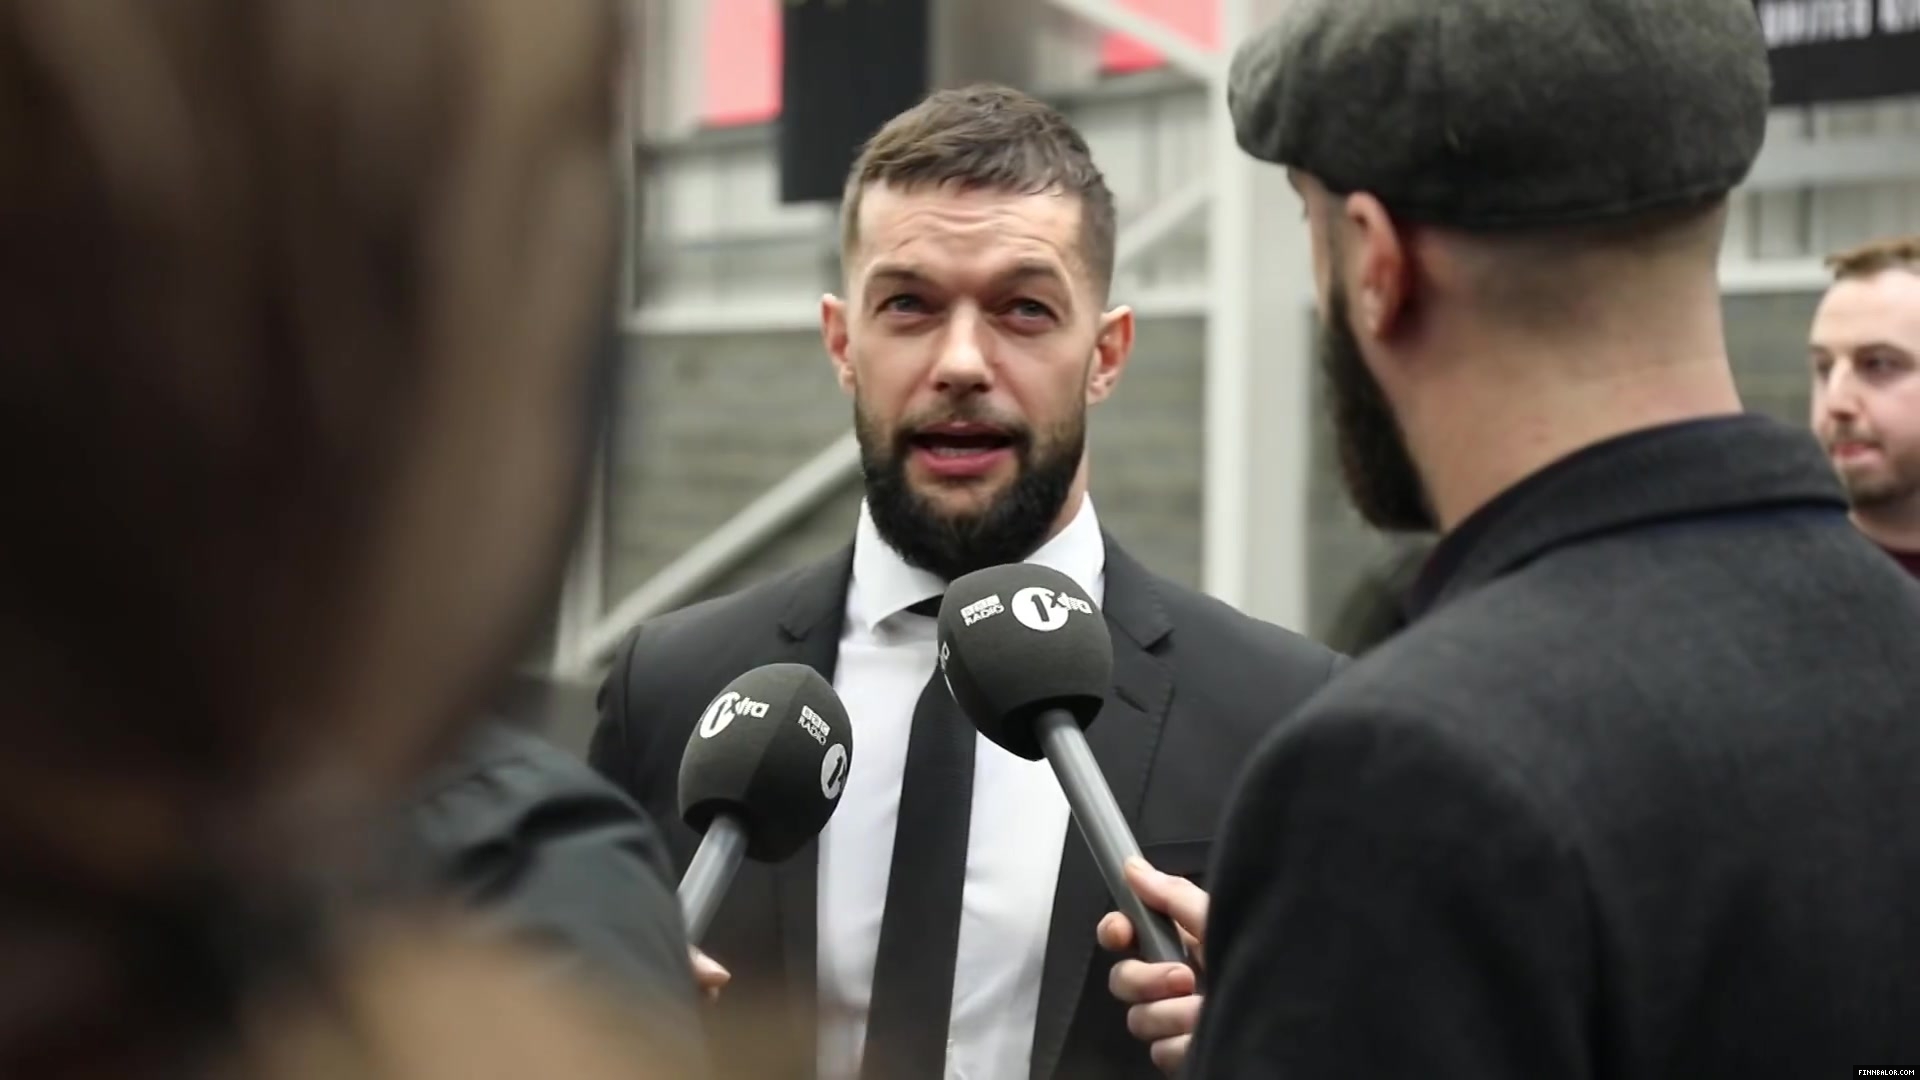 WWE_Superstar_FINN_BALOR_joins_MOUSTACHE_MOUNTAIN_at_the_opening_of_the_NXT_UK_PC_018.jpg